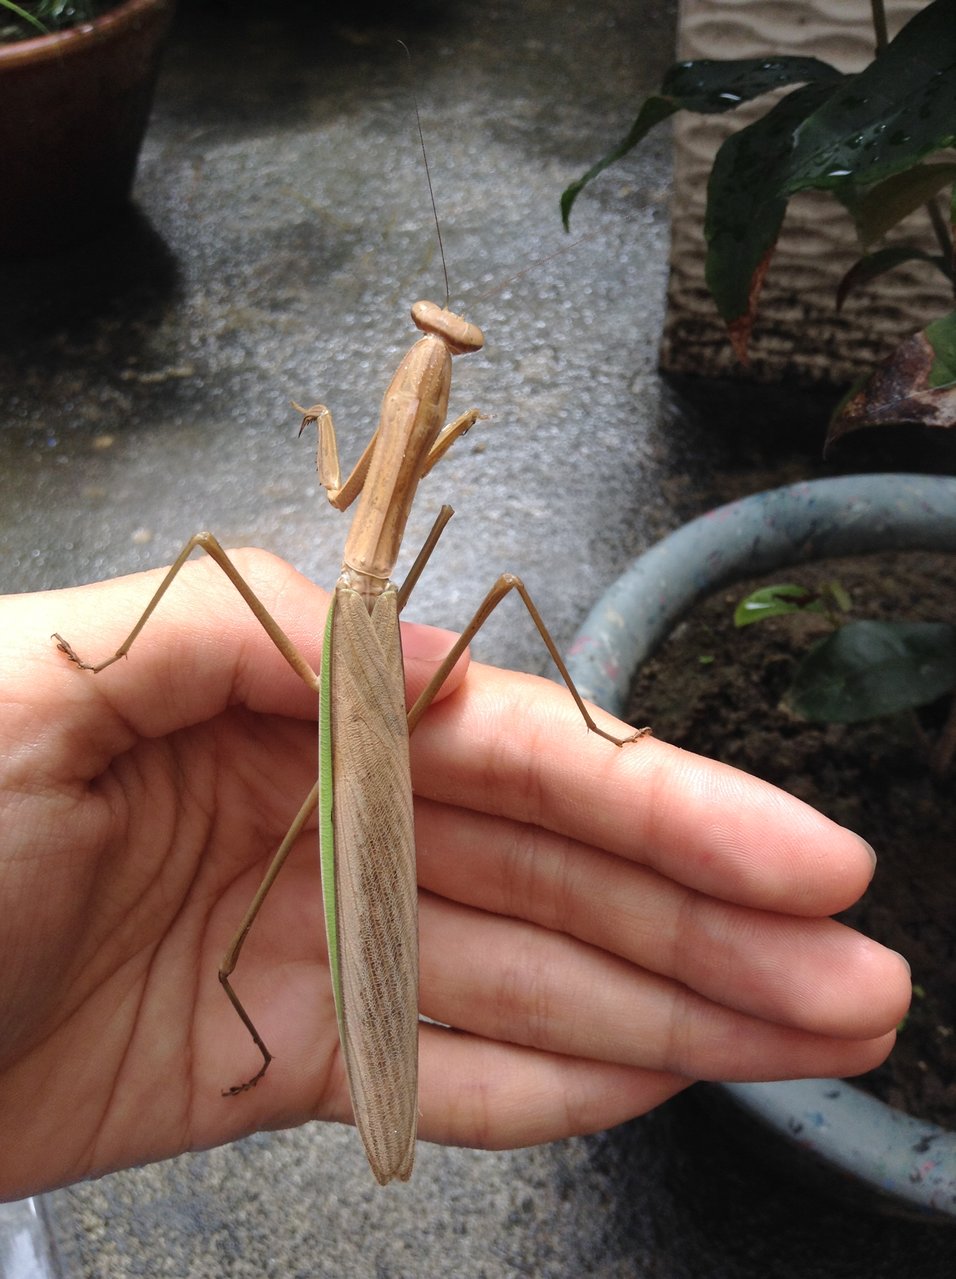 ID?  Largest mantis I've seen in person!